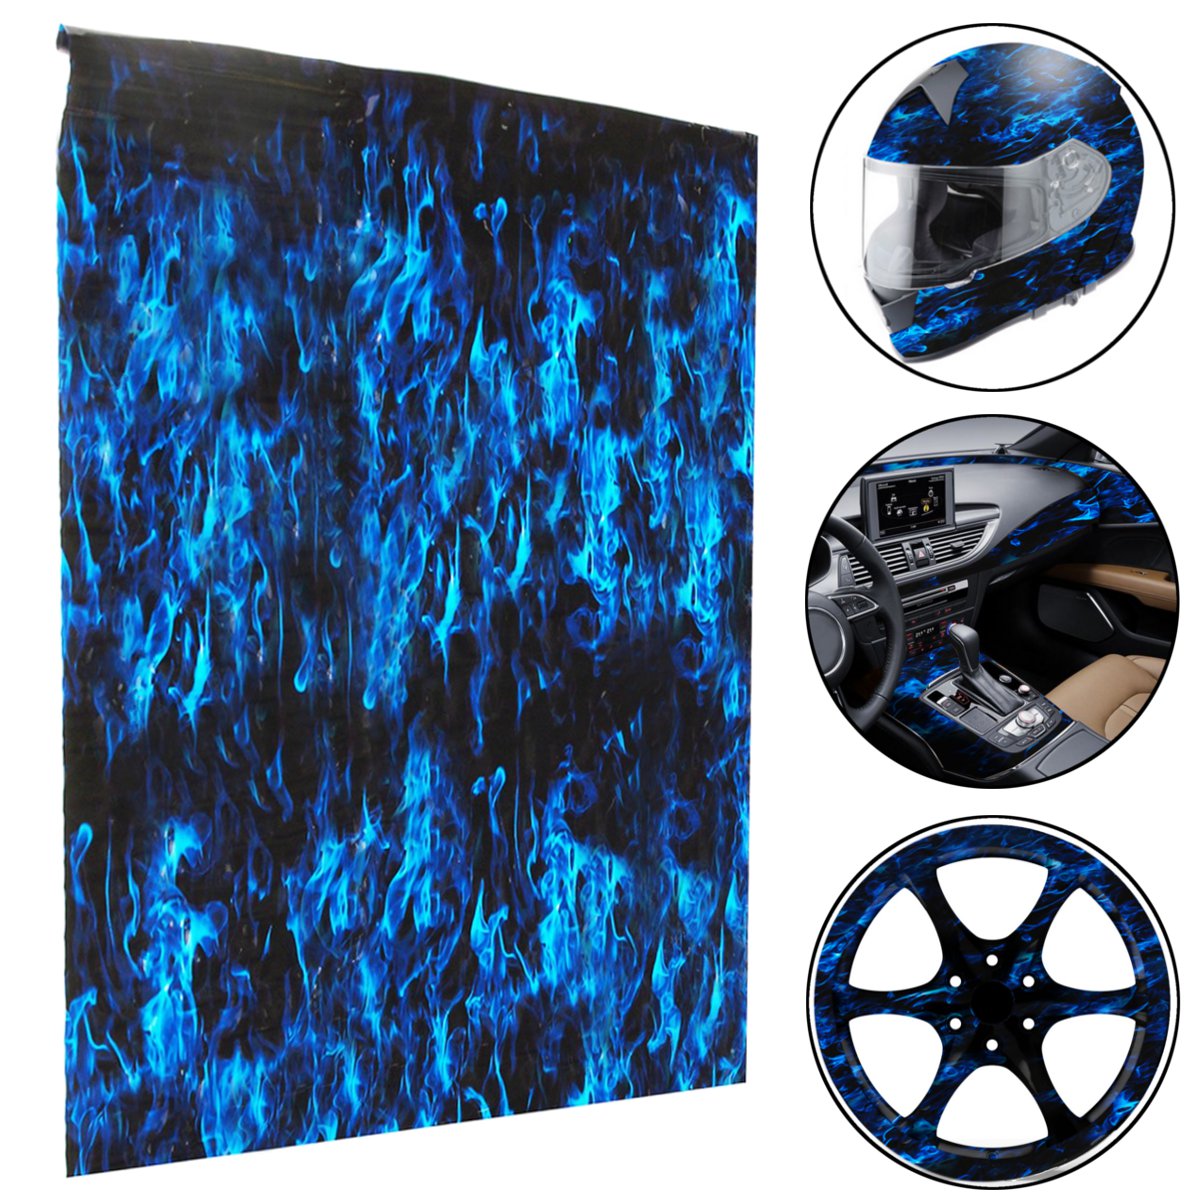 

PVA Hydrographic Film Water Transfer Printing Film Hydro Dip Blue Fire Style Decorations